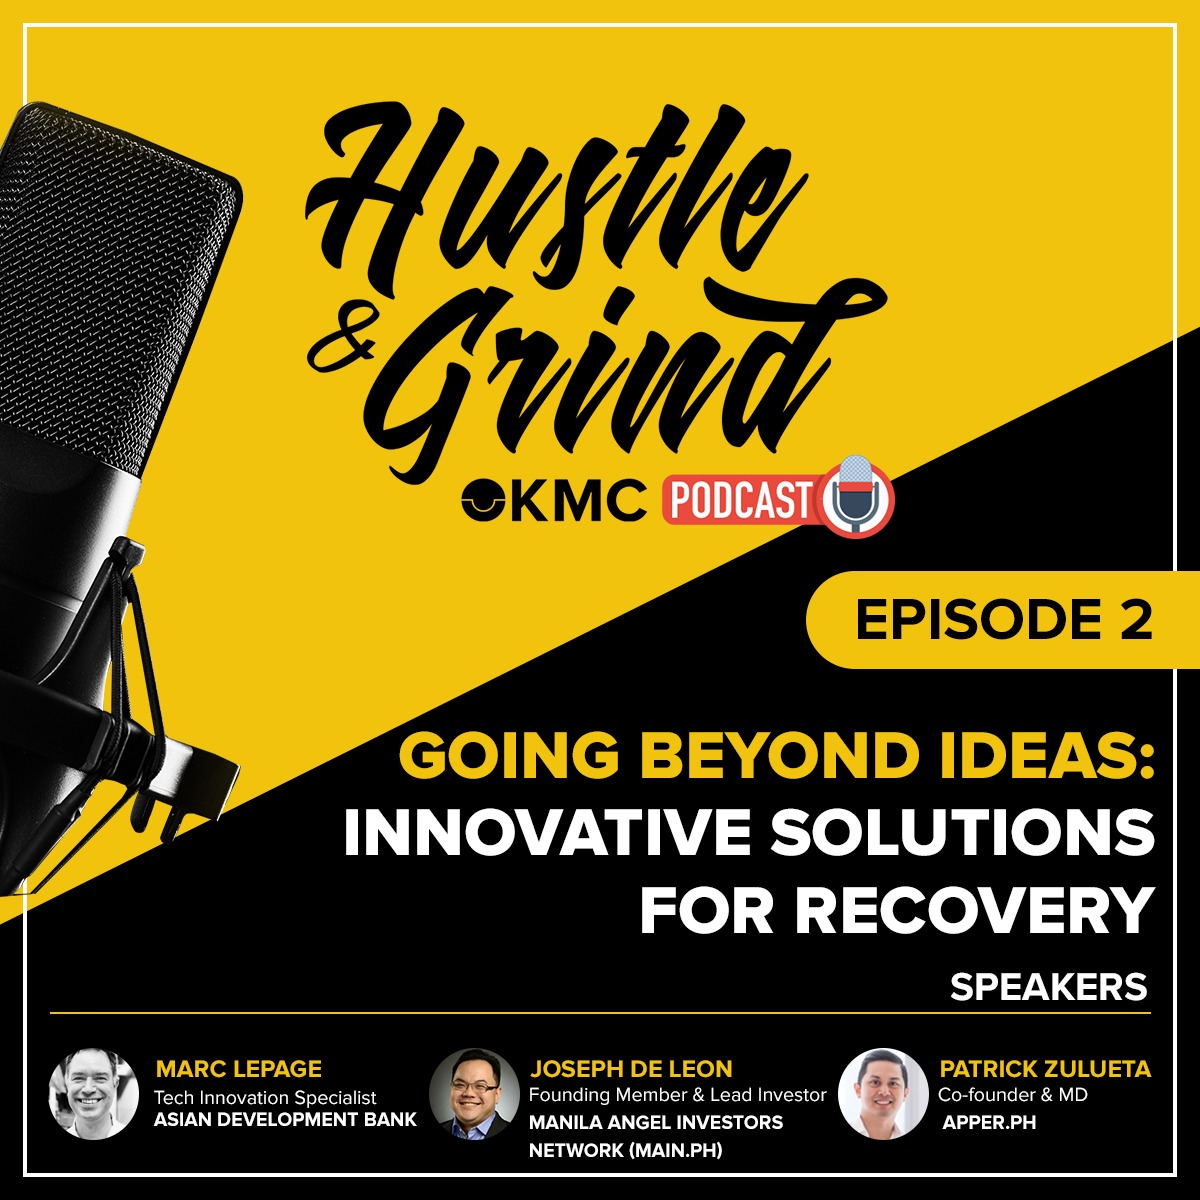 Going Beyond Ideas: Innovative Solutions for Recovery - Hustle & Grind